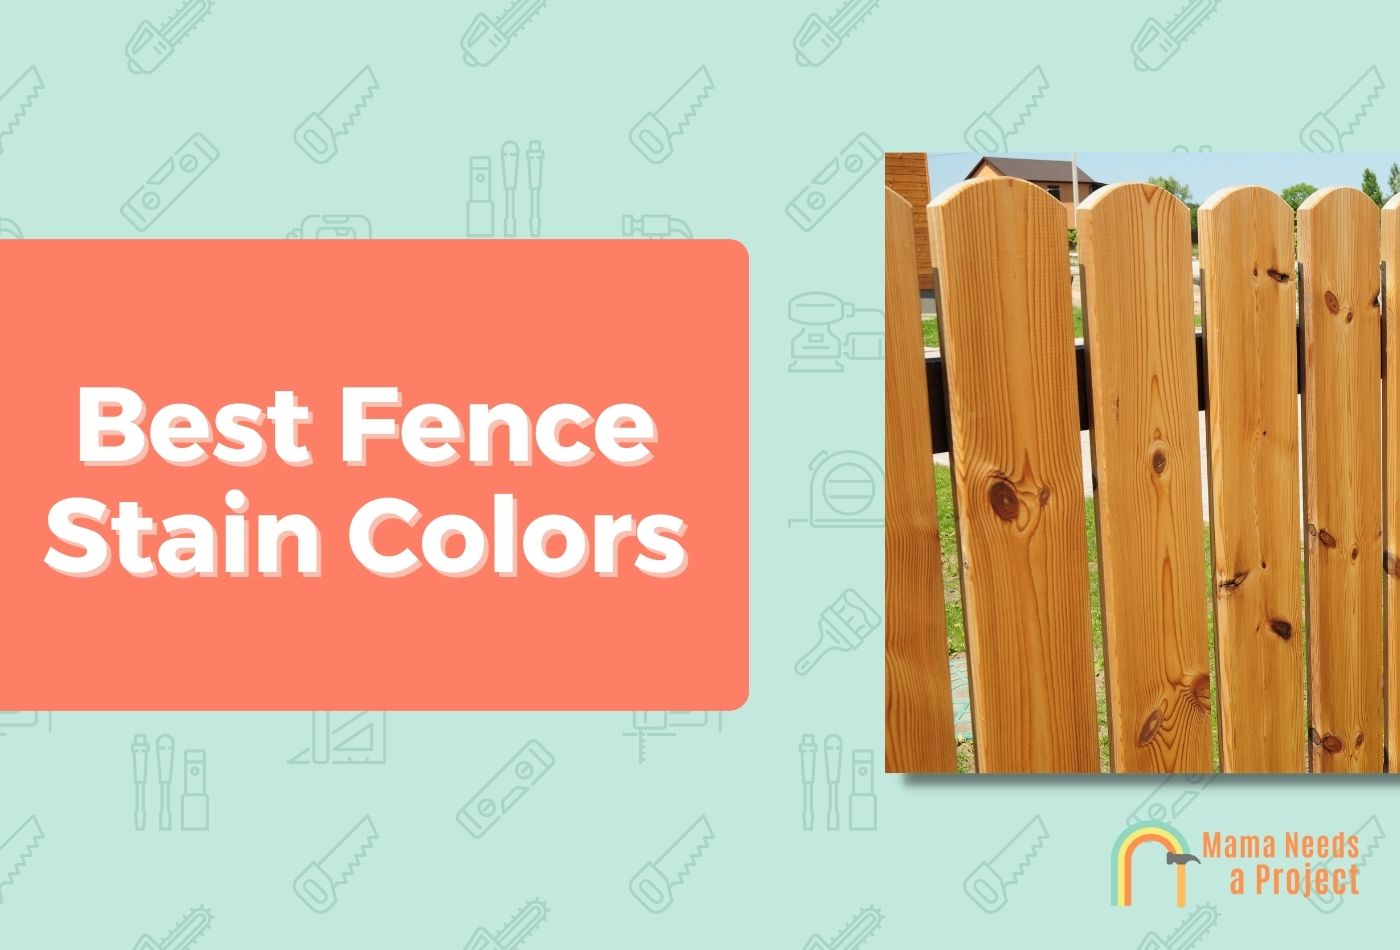 Best Fence Stain Colors